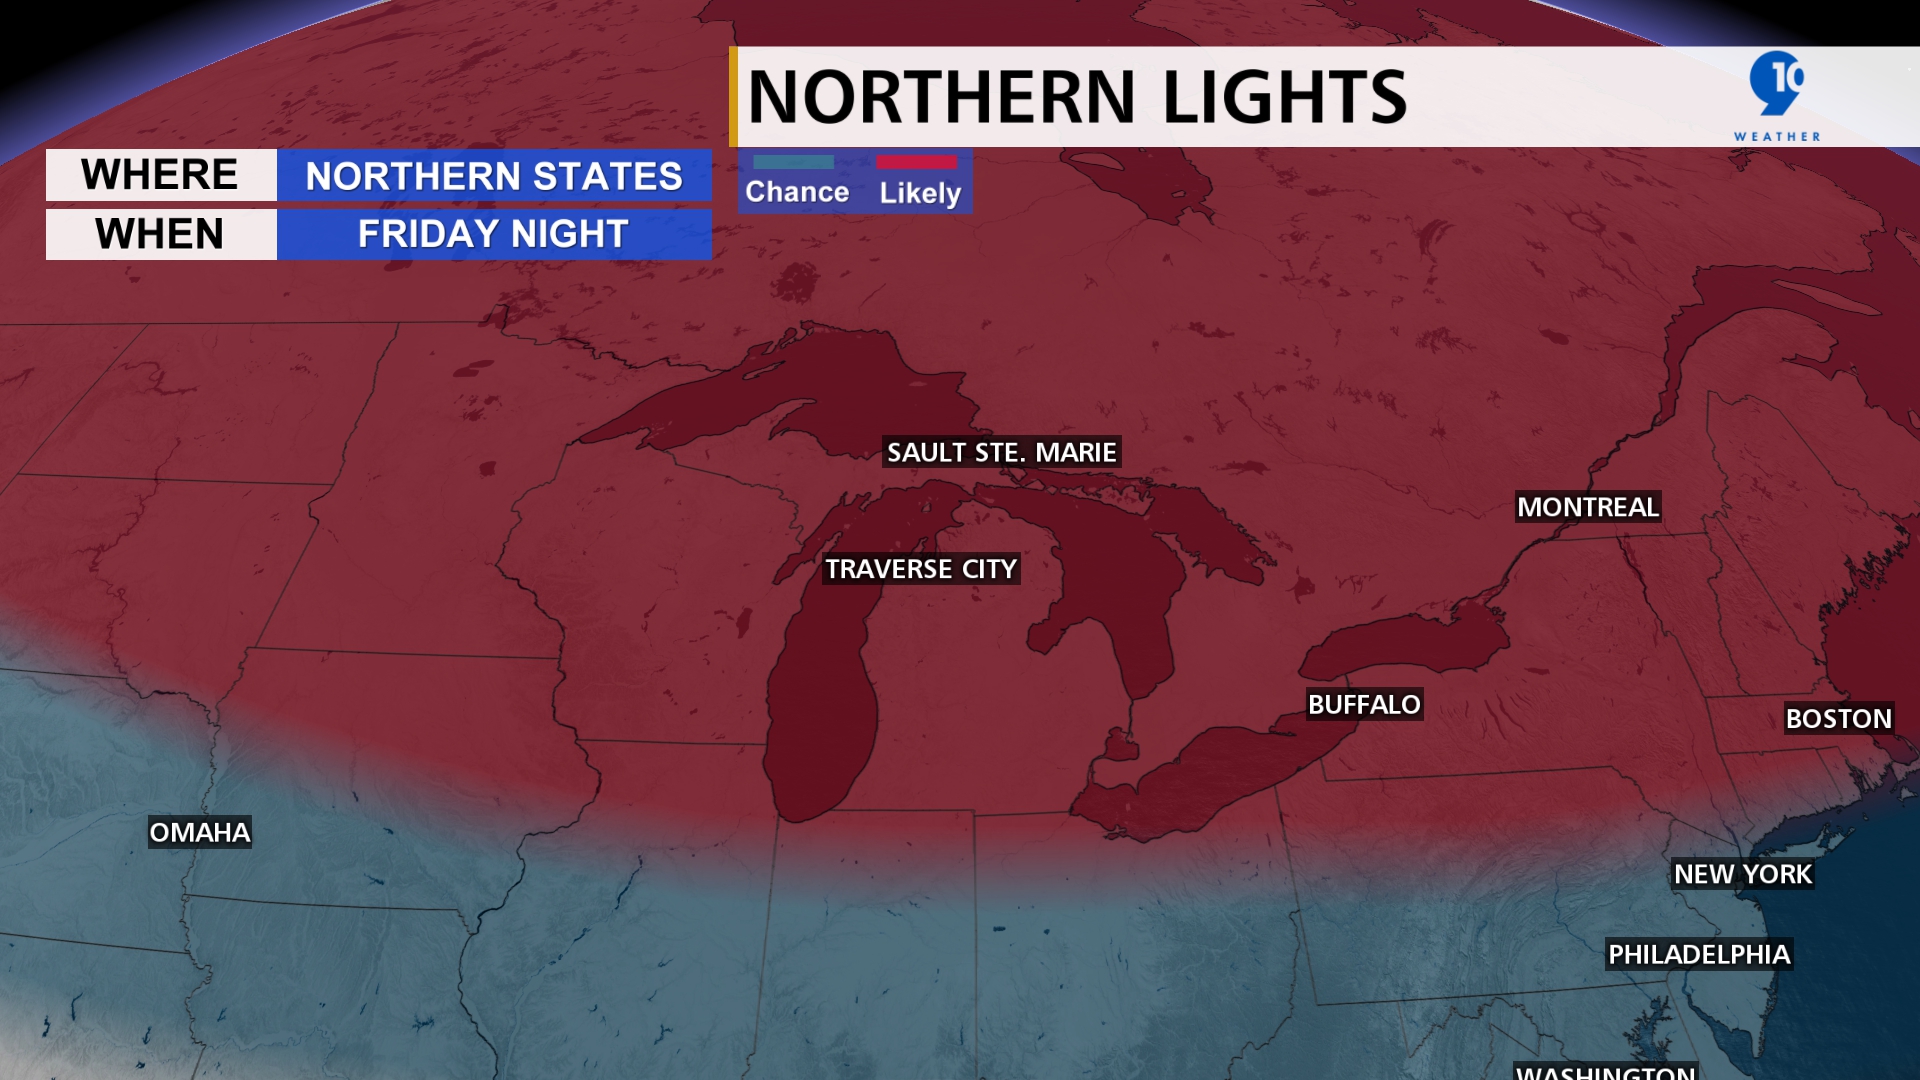 Northern Lights very possible starting Friday night